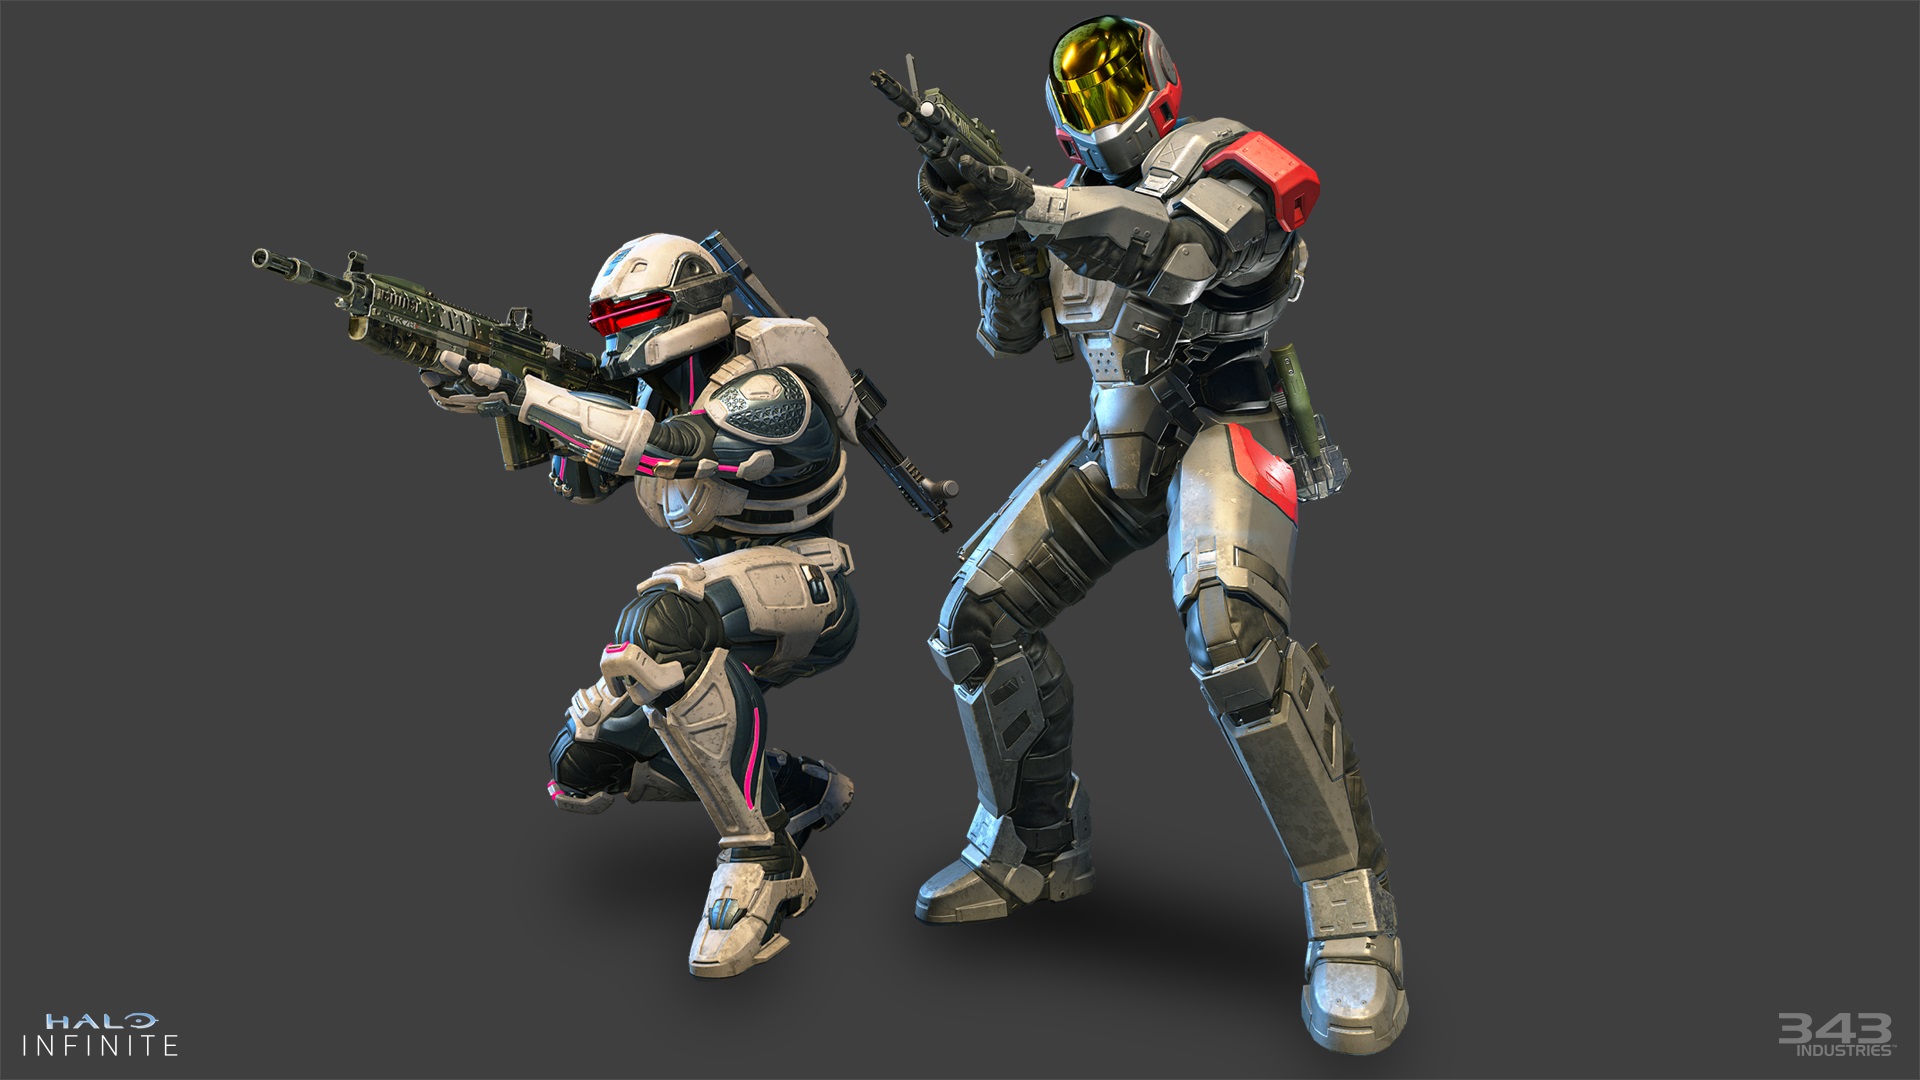 Image of CHIMERA and MIRAGE IIC Armor Cores